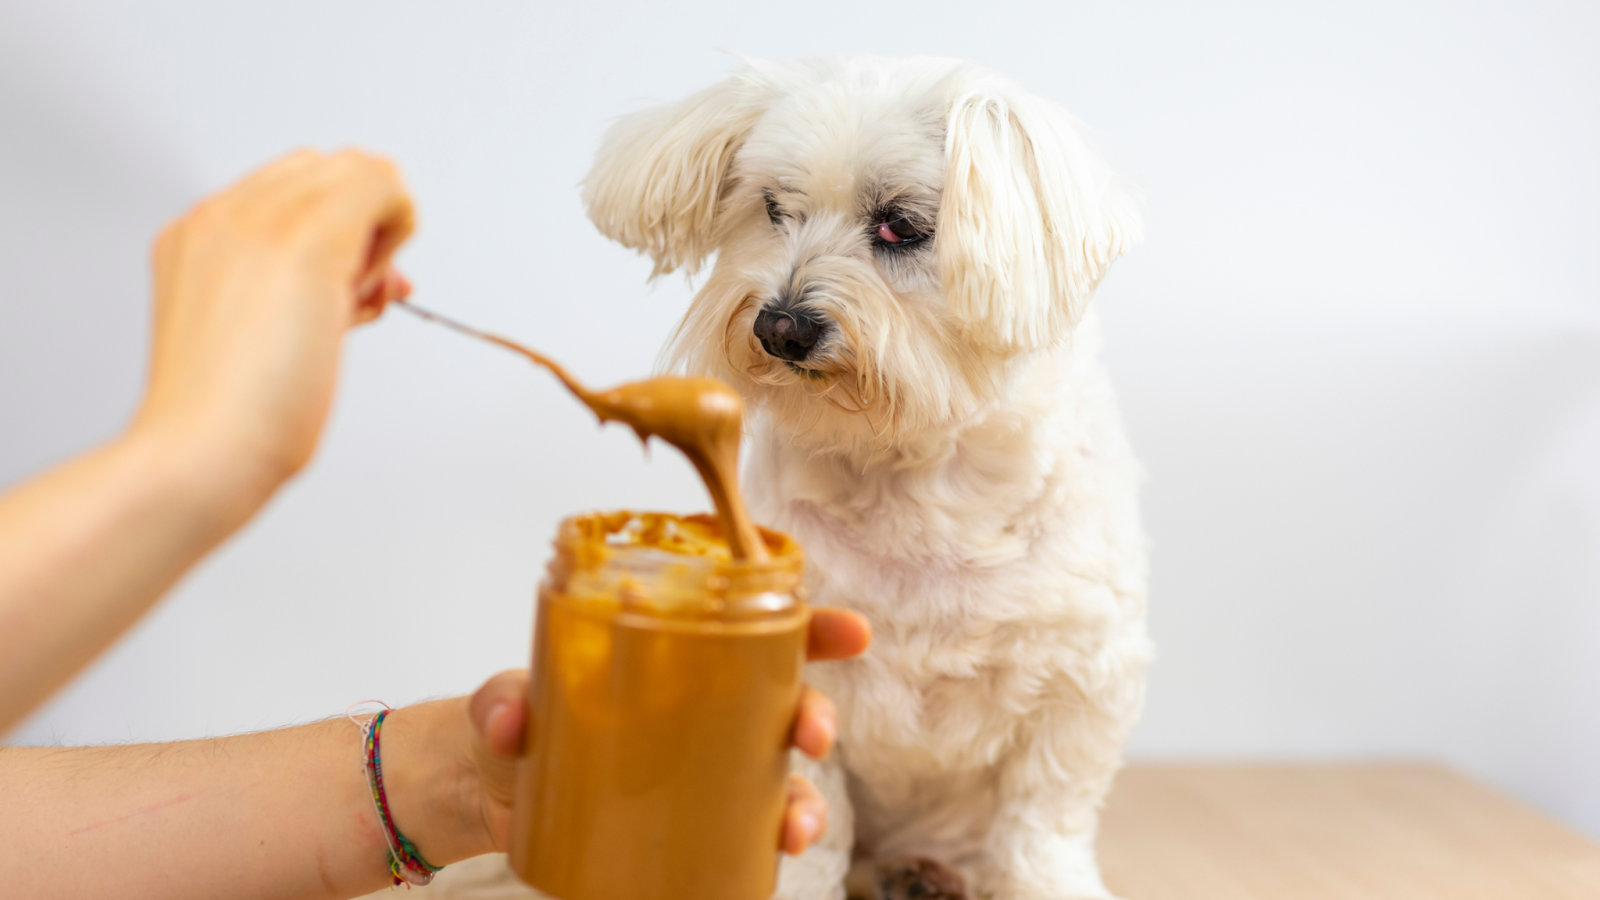 can dogs eat almond butter